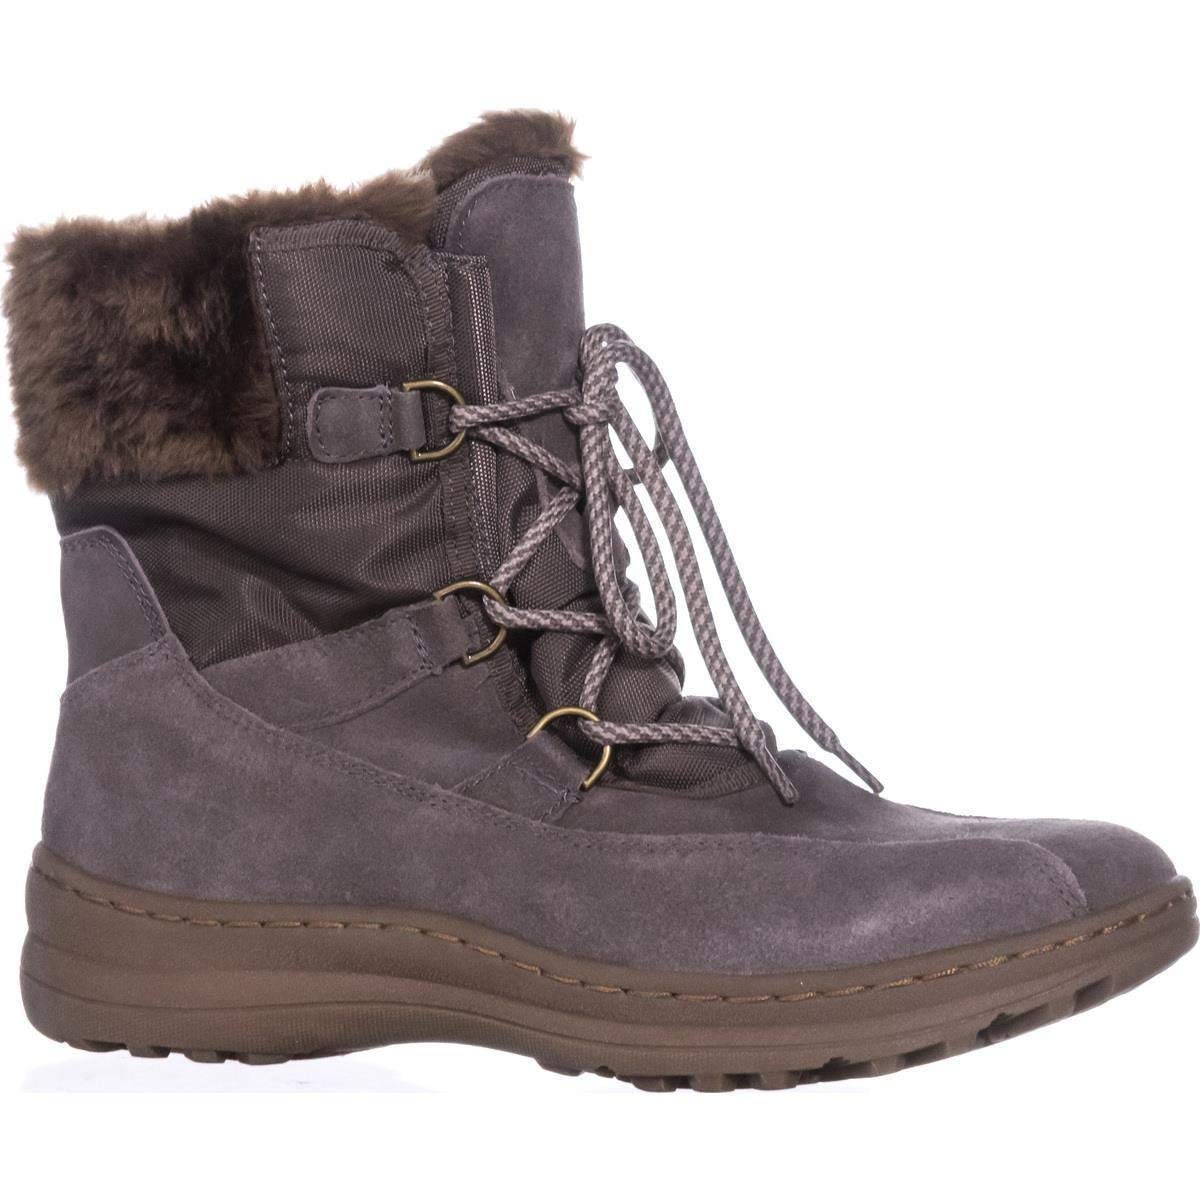 Bare Traps Womens Aero Leather Round Toe Ankle Cold Weather Boots, Mud ...